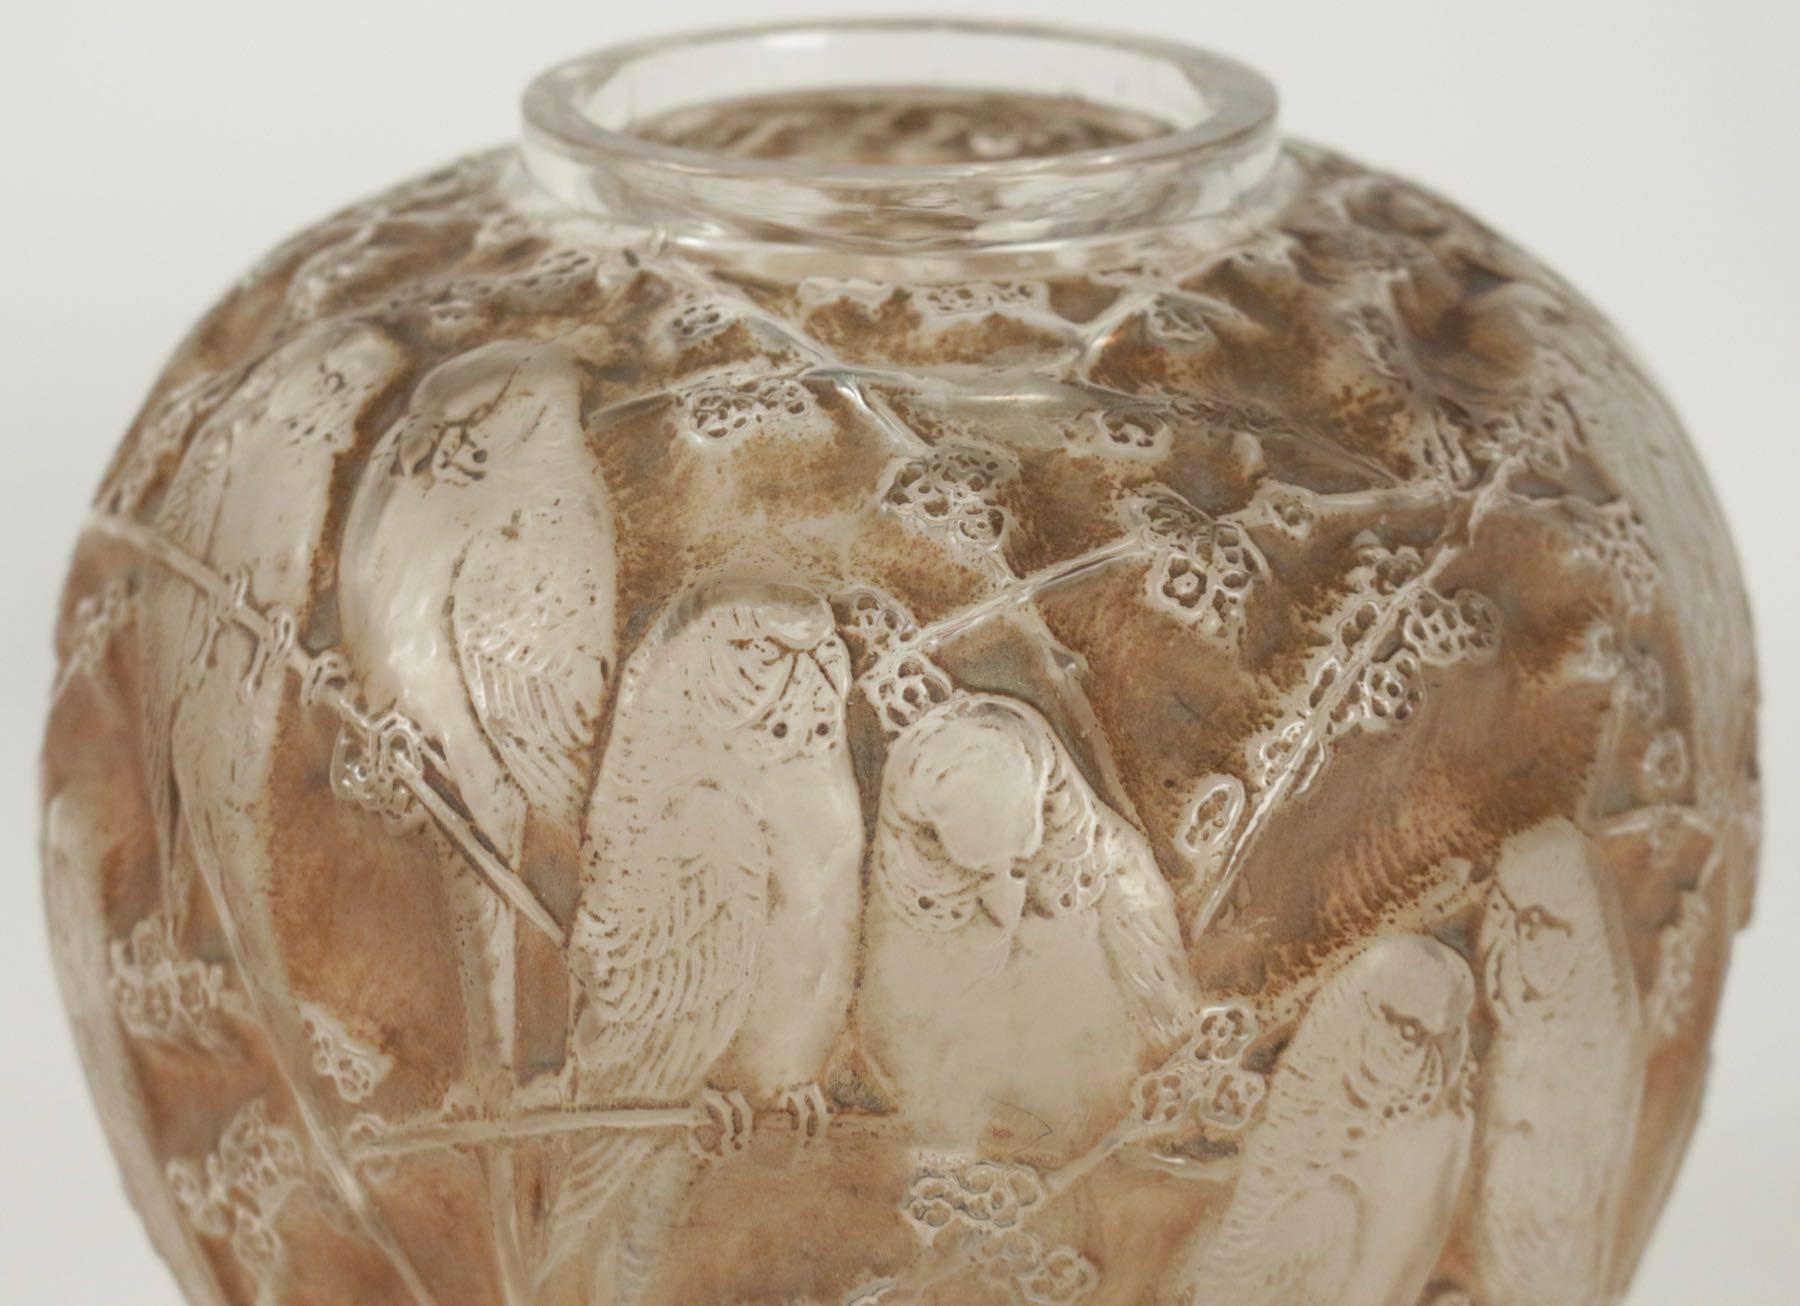 Rene Lalique (1860-1945).
Frosted glass highlighted ith sepia stain decorated all-over with a design of pairs of small birds perched amongst foliage.
Model created in 1919. H 25.5 cm. 
